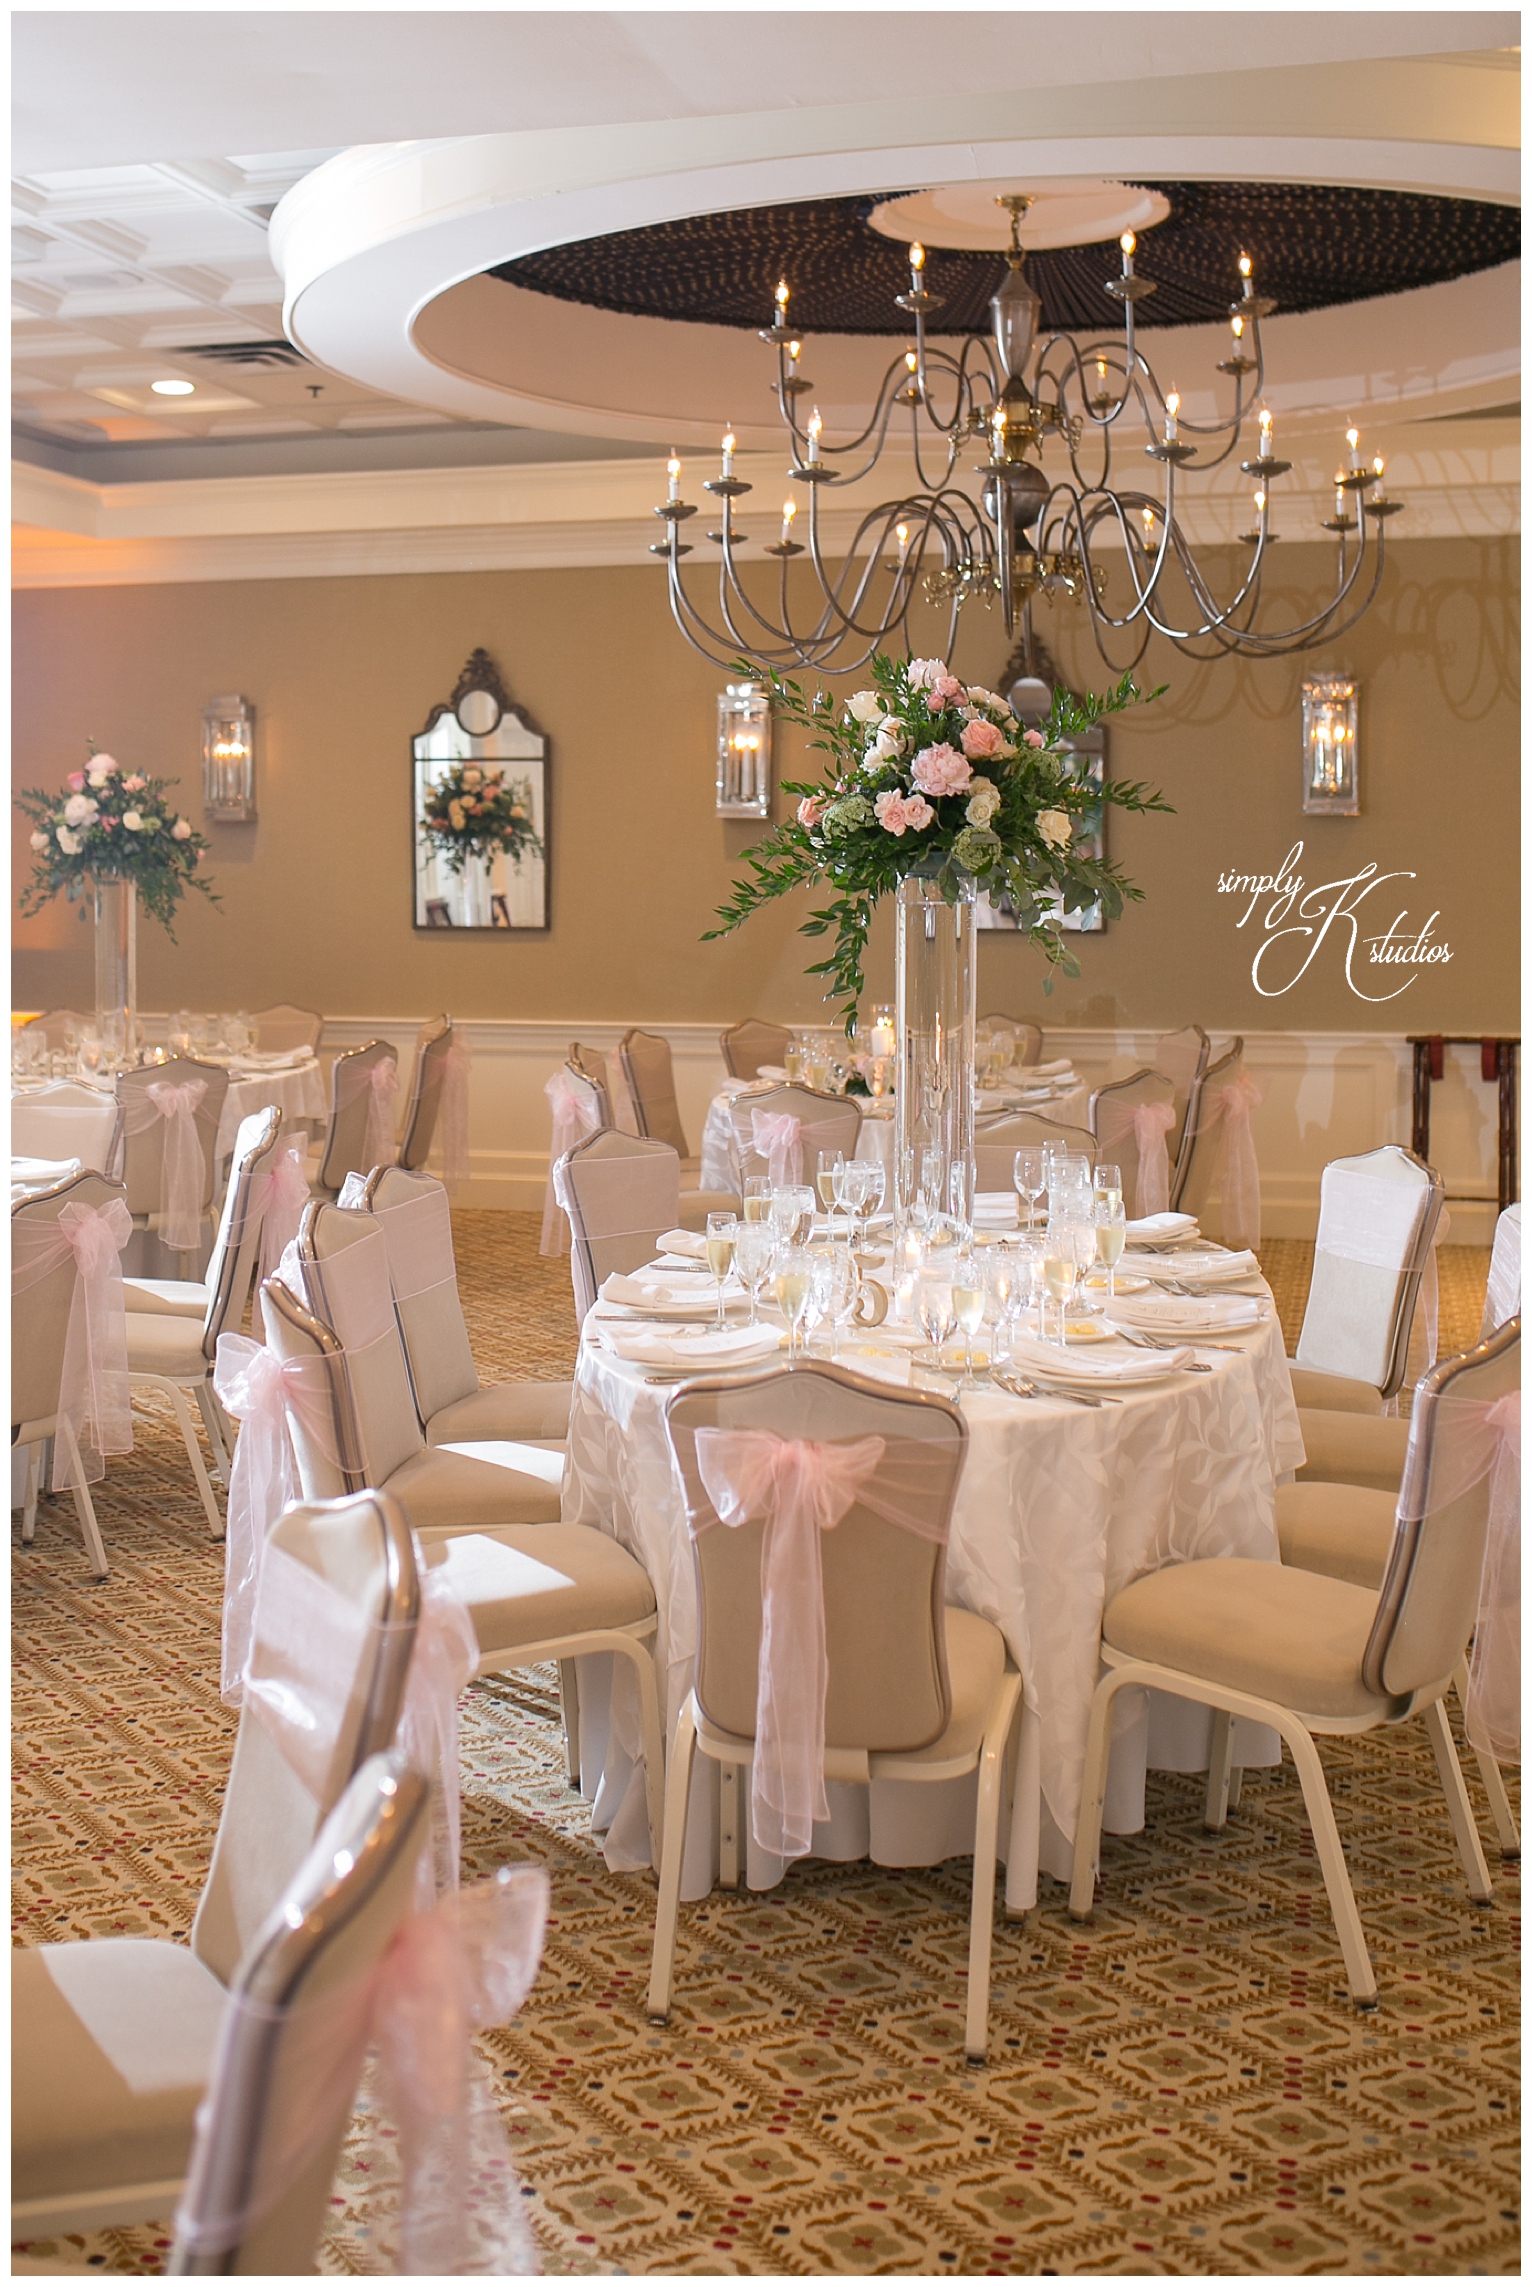 Reception space decorated at wedding venue in Simsbury CT, The Simsbury Inn.